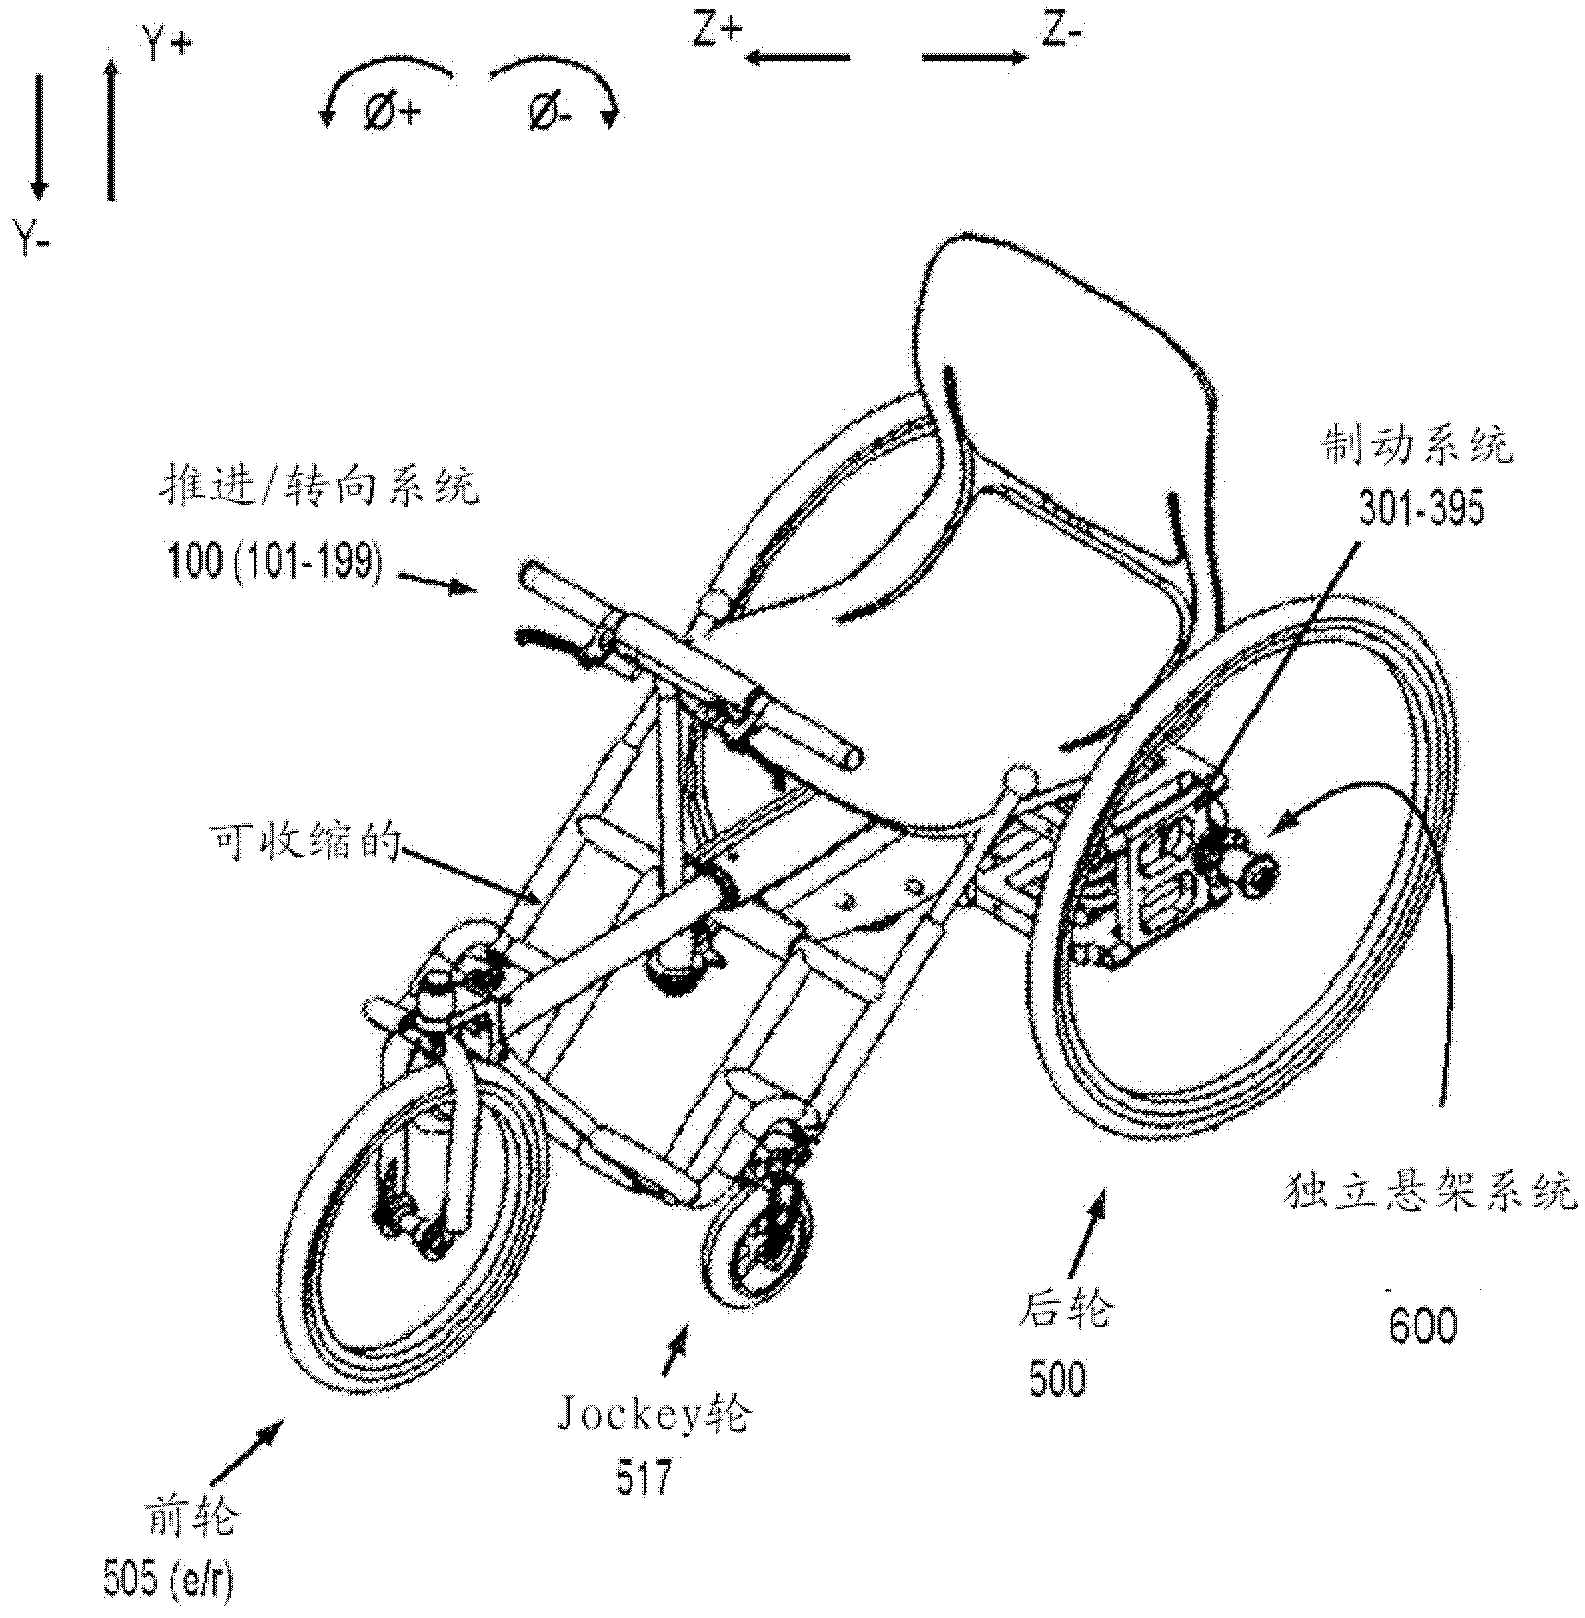 Rowing-motion propelled wheelchair generating power from rowing motions in both directions